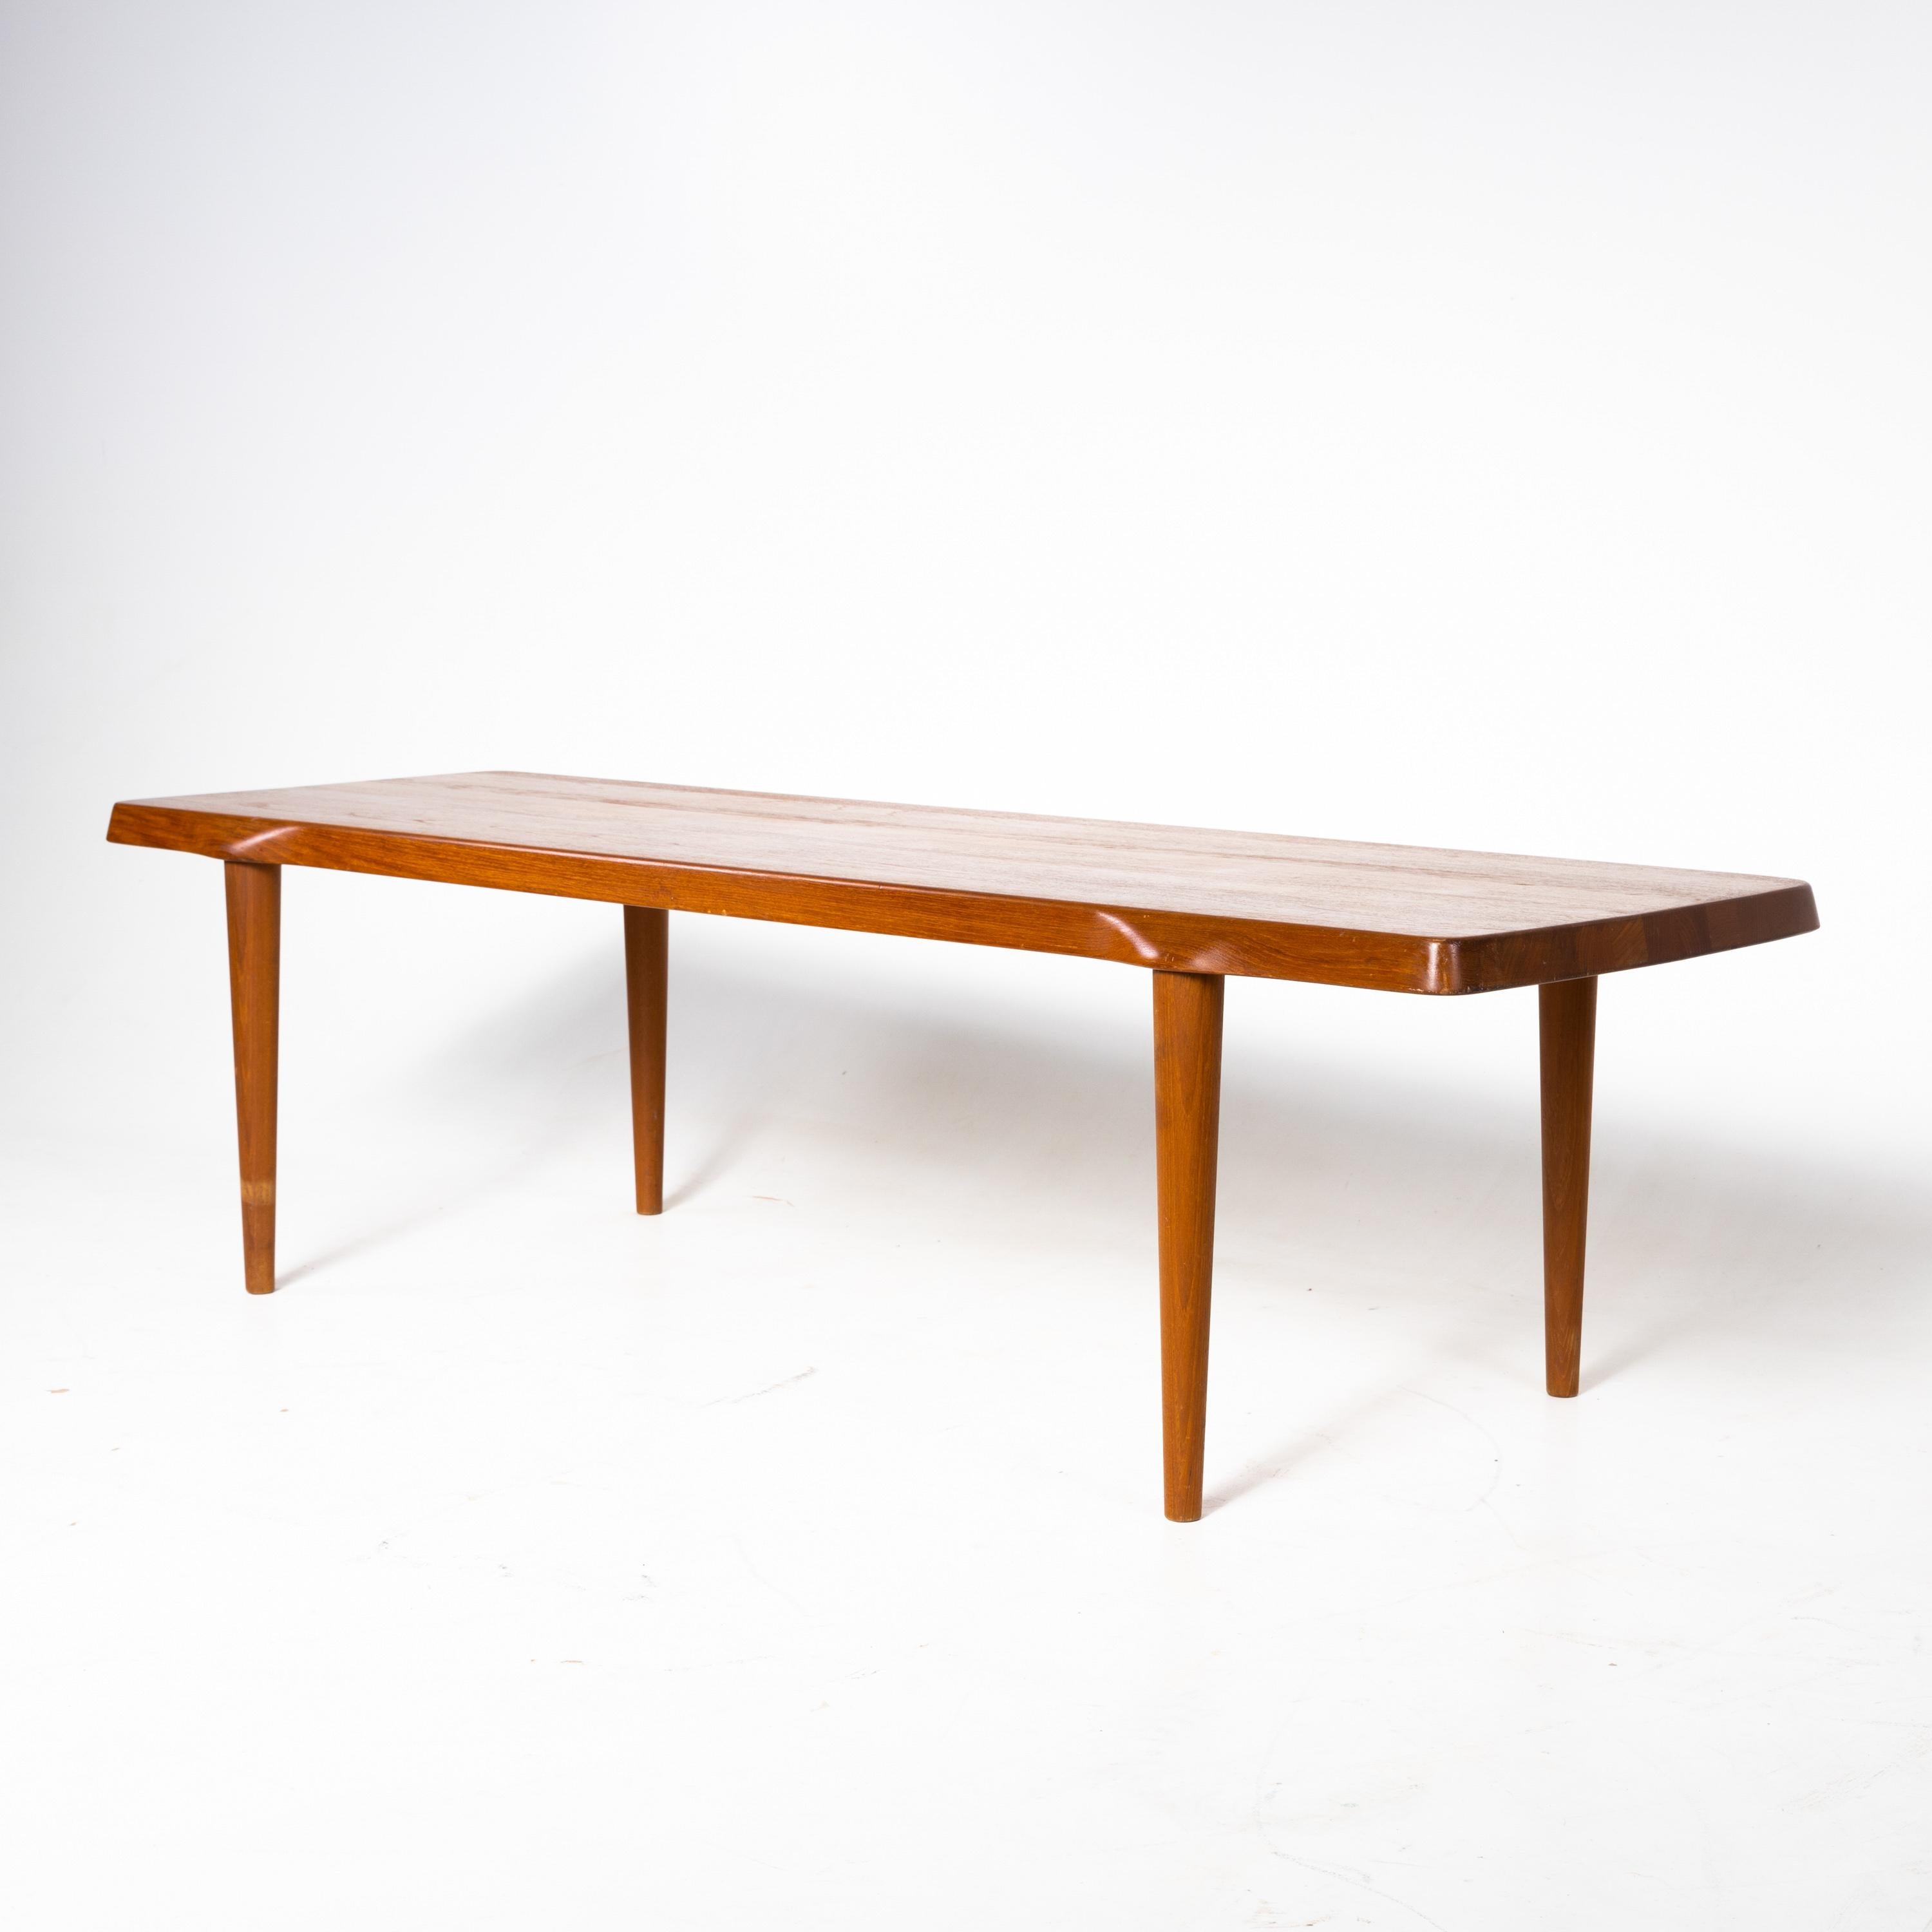 Midcentury design coffee table standing on four conical legs. The transition between the legs and the tabletop is slightly wavy and the edge of the table top is slightly angled. Signs of age and wear in the form of slight scratches.